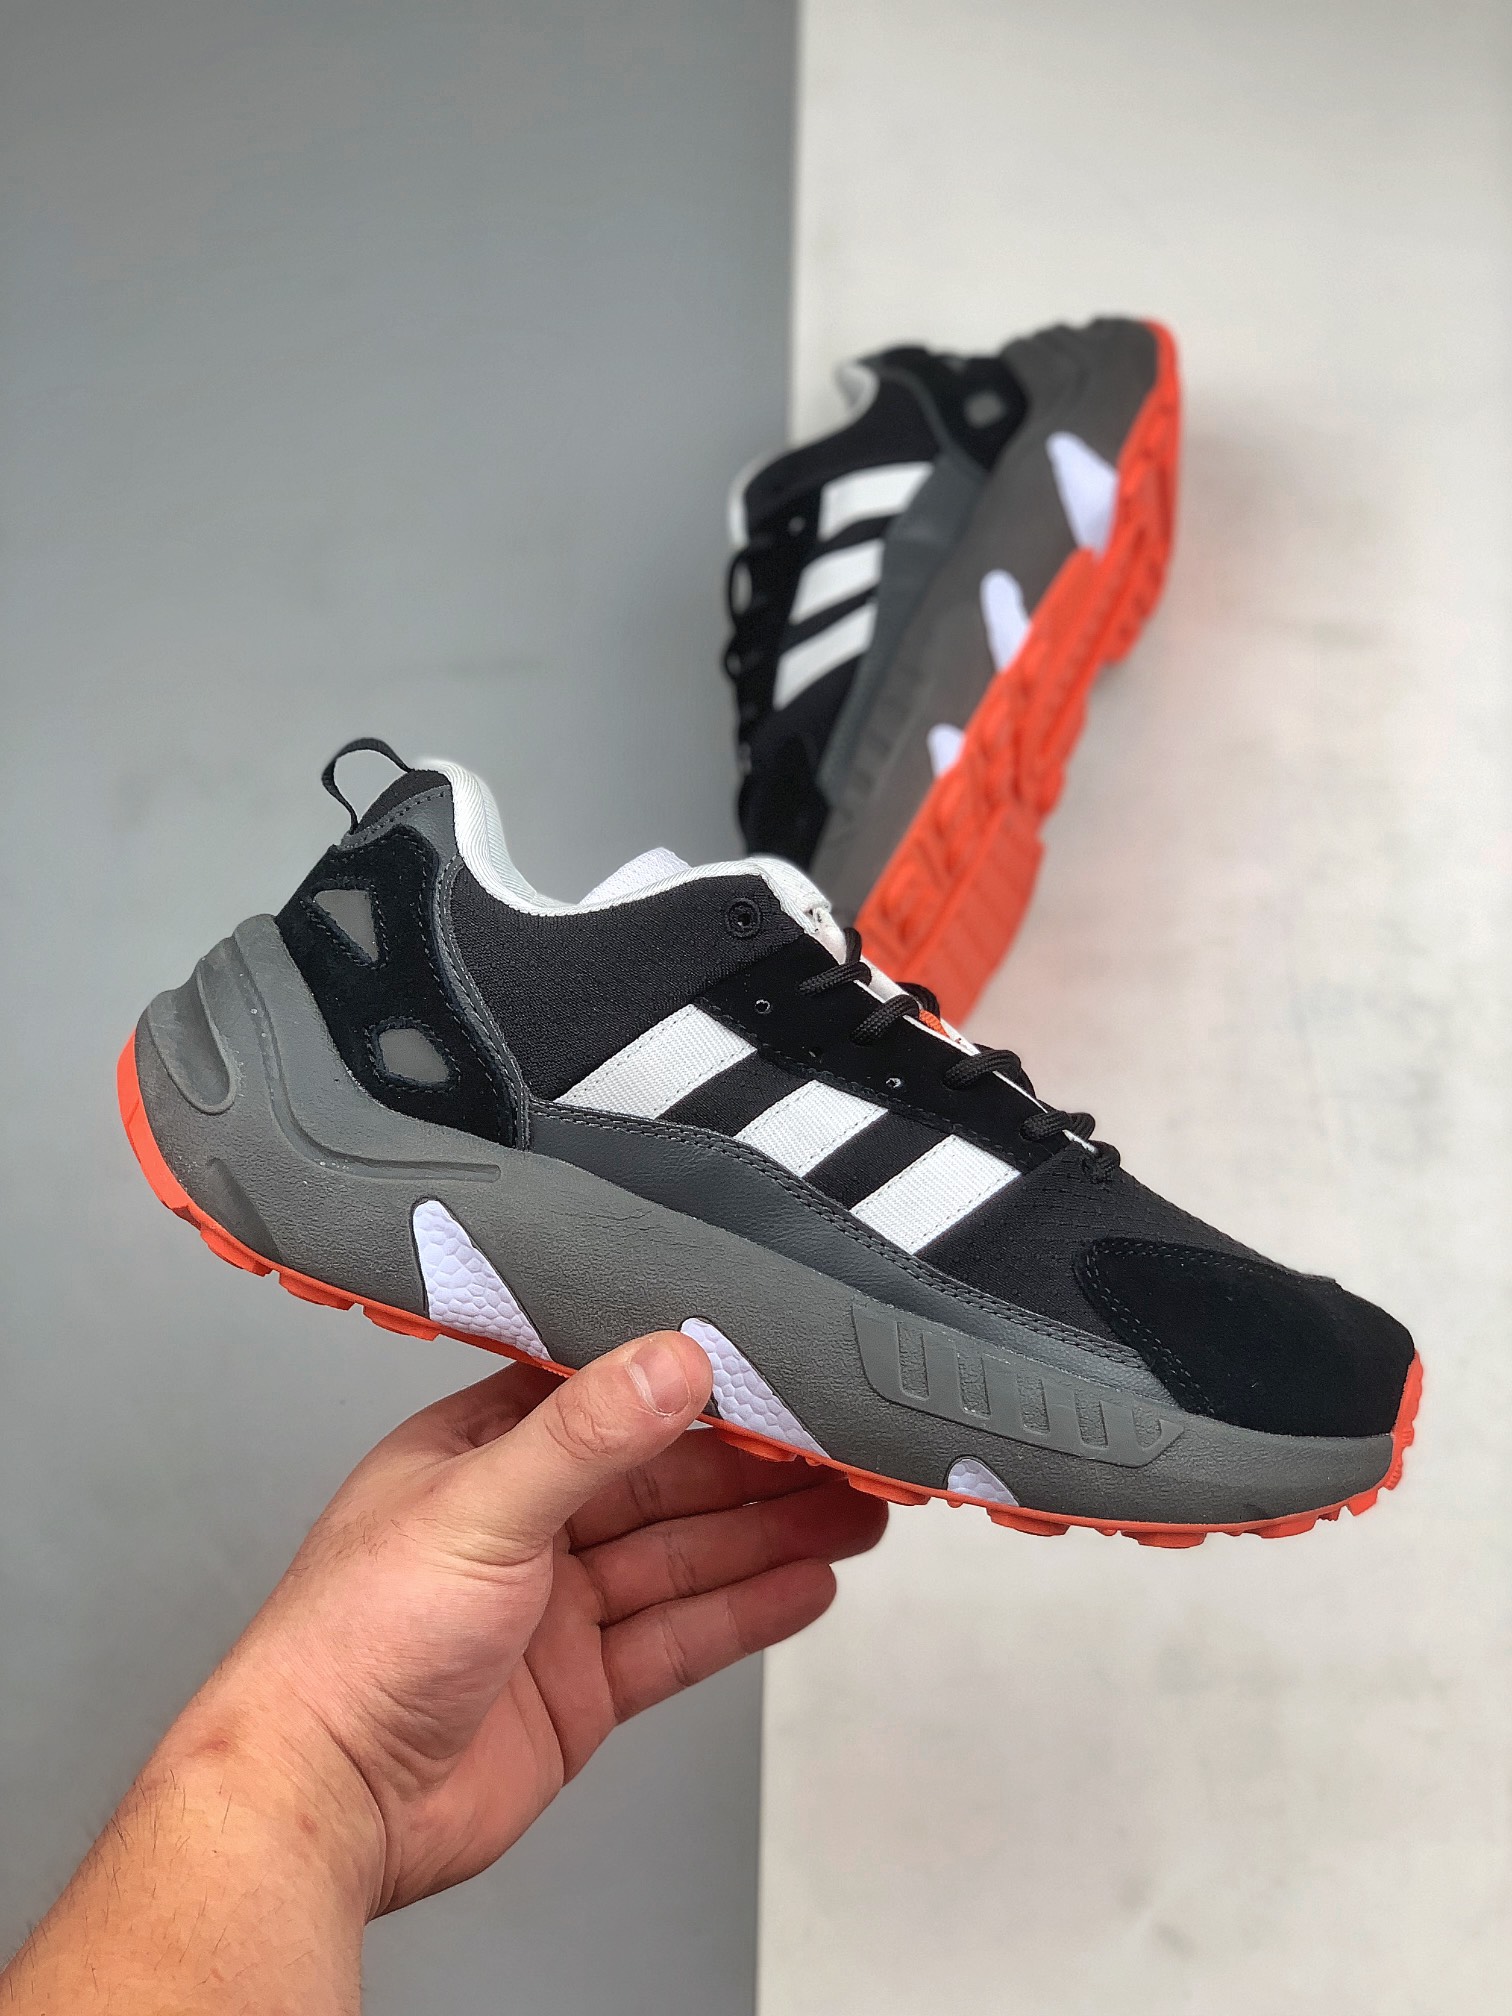 Adidas ZX 22 Boost Black Grey GX8662 - Ultimate Style and Comfort